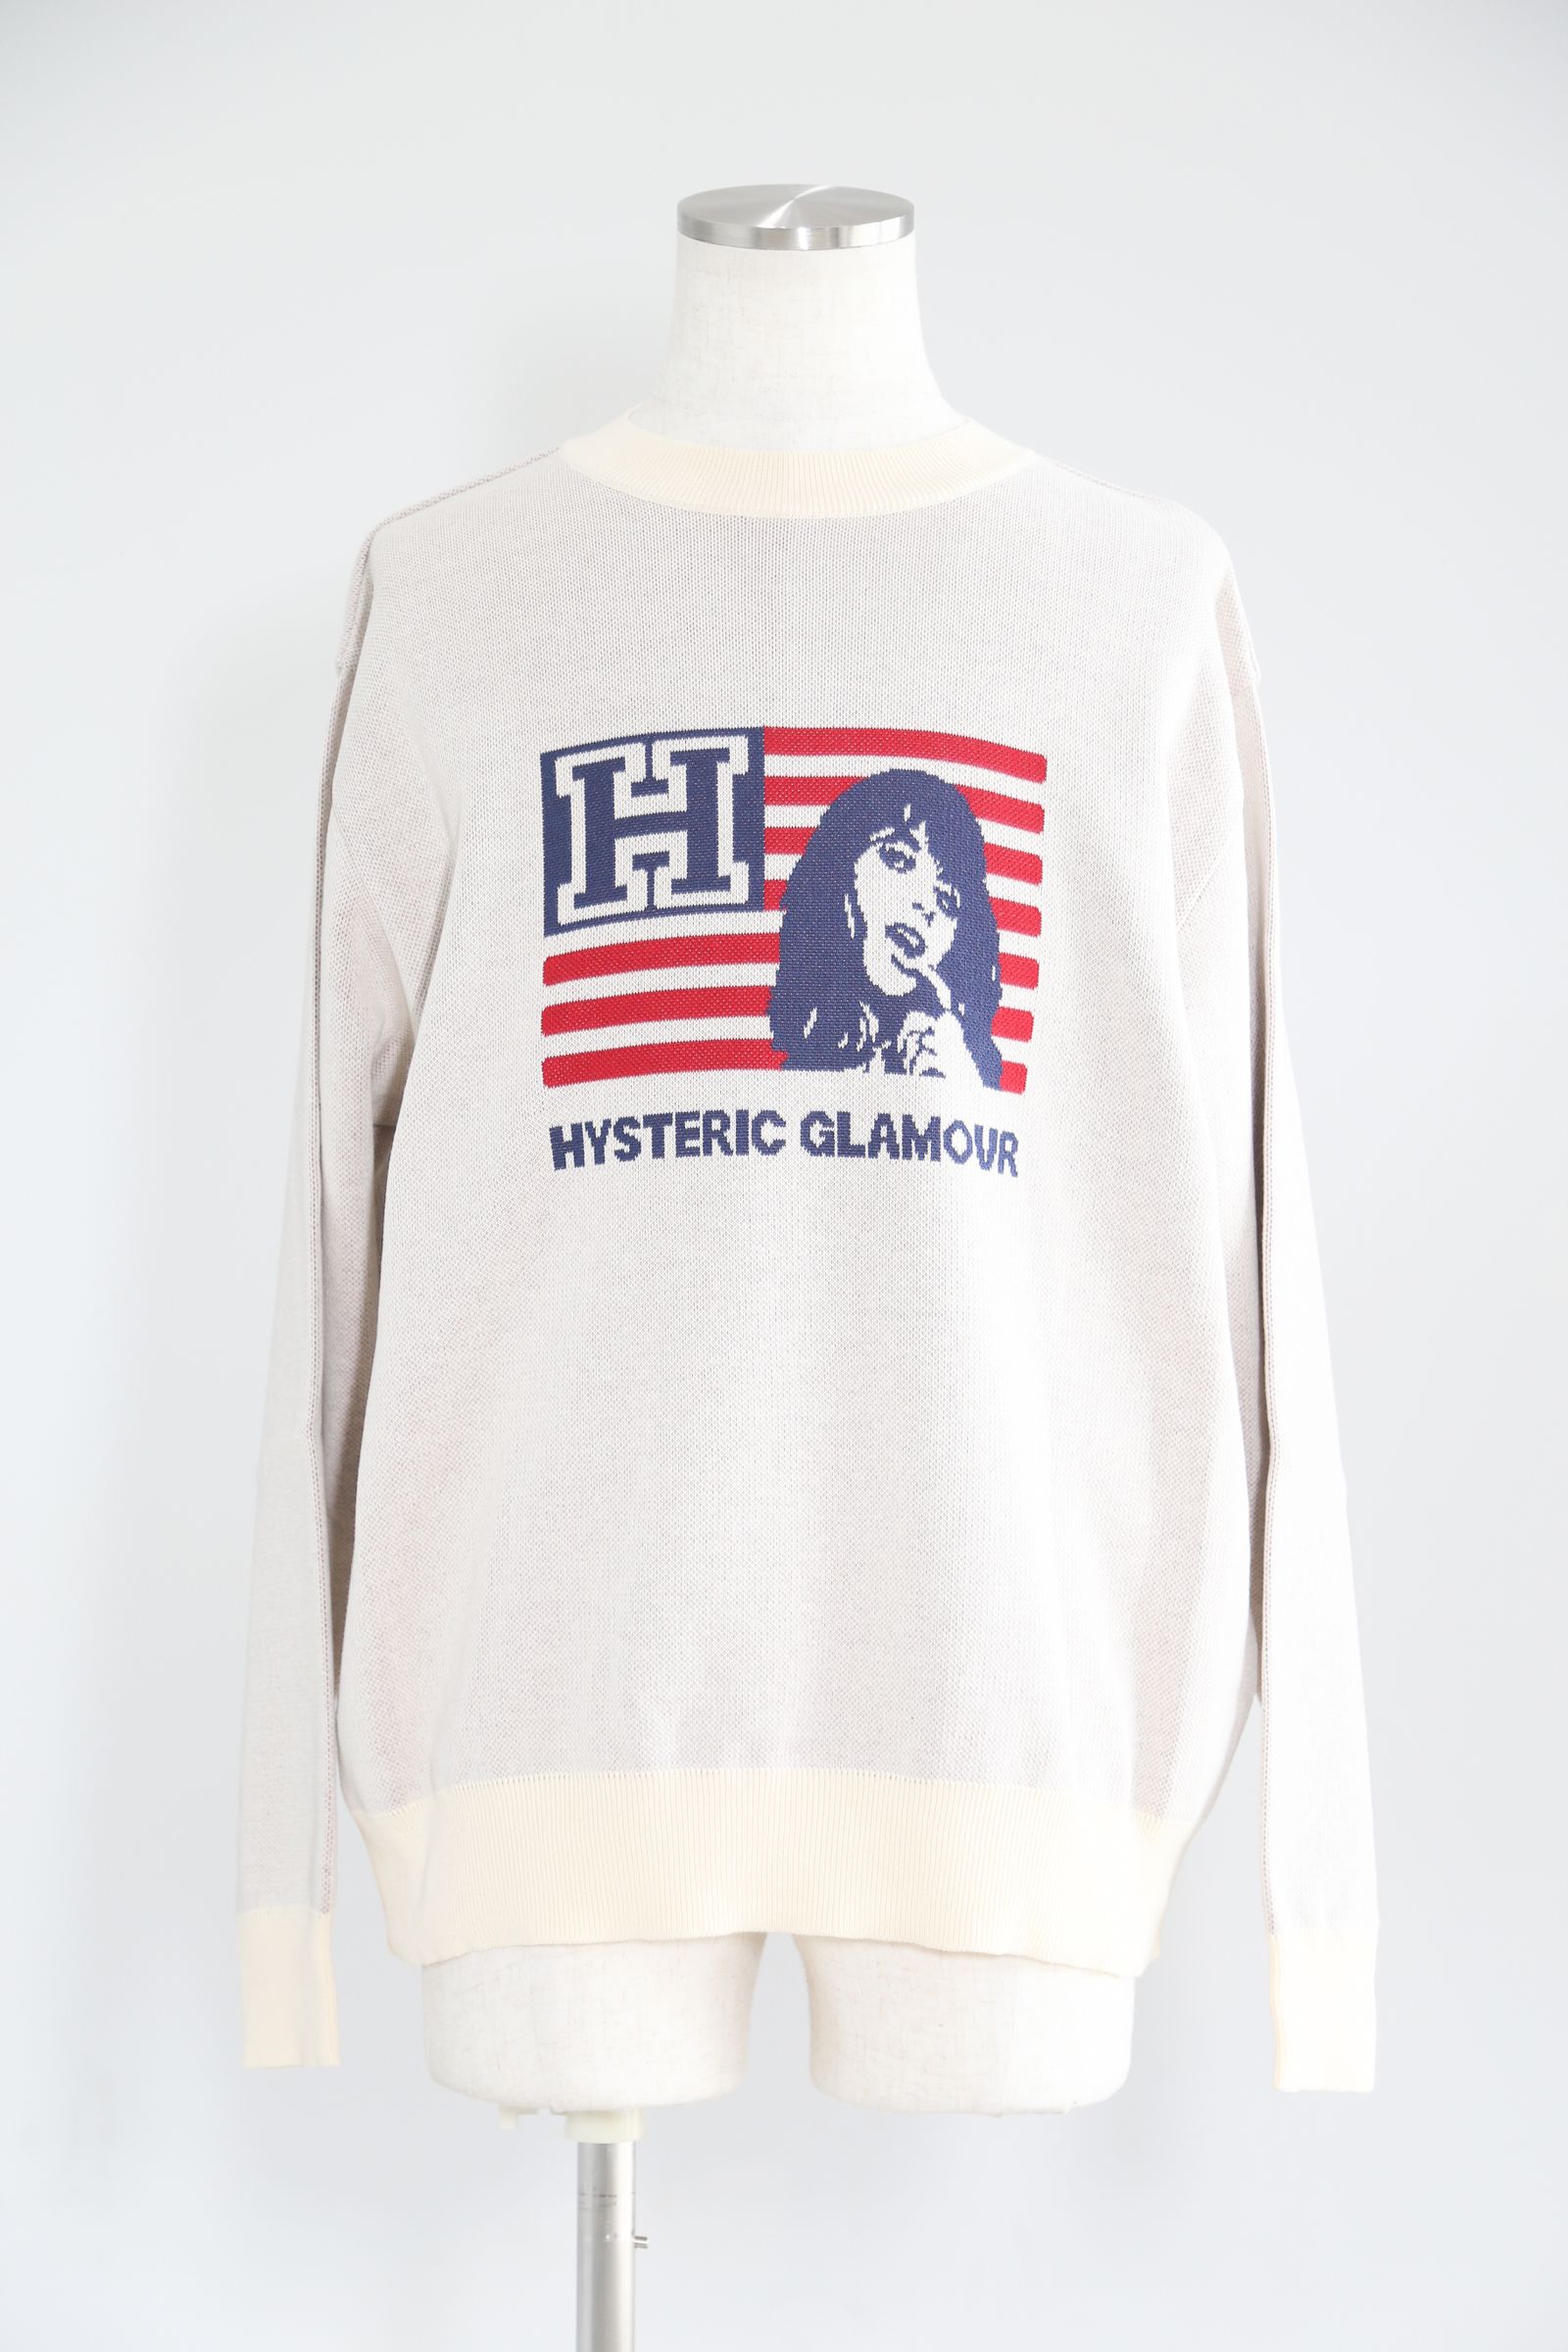 HYSTERIC GLAMOUR - H AND STRIPESジャカード セーター / ホワイト | Tempt